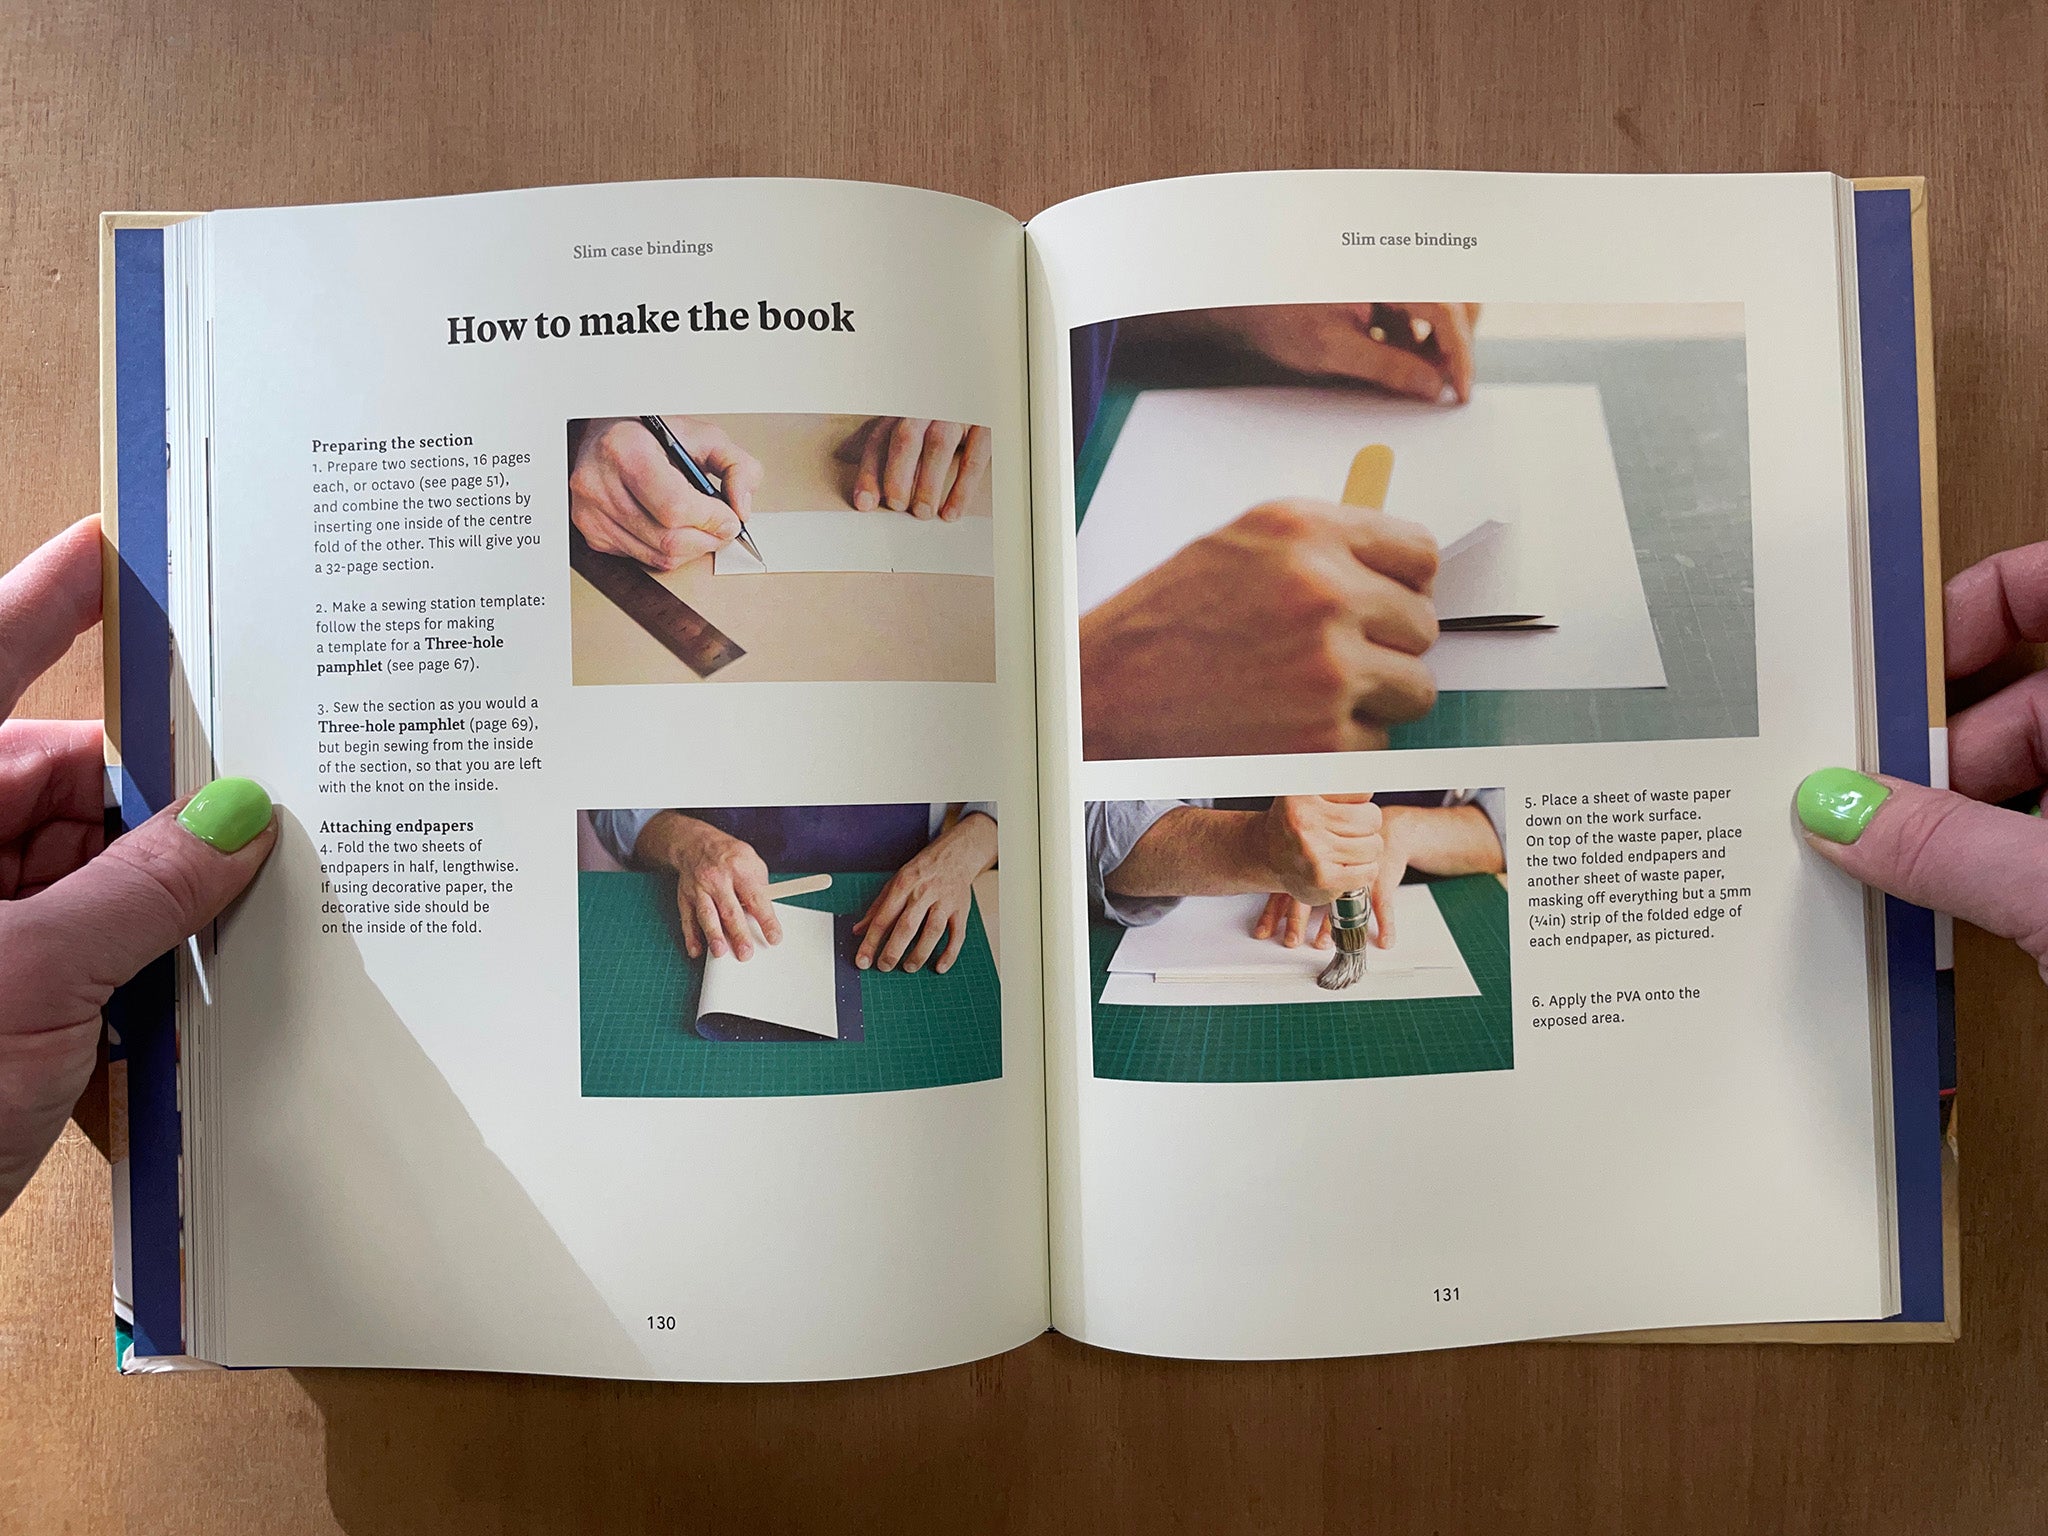 MAKING BOOKS: A GUIDE TO CREATING HAND-CRAFTED BOOKS BY THE LONDON CENTRE FOR BOOK ARTS by Simon Goode & Ira Yonemura